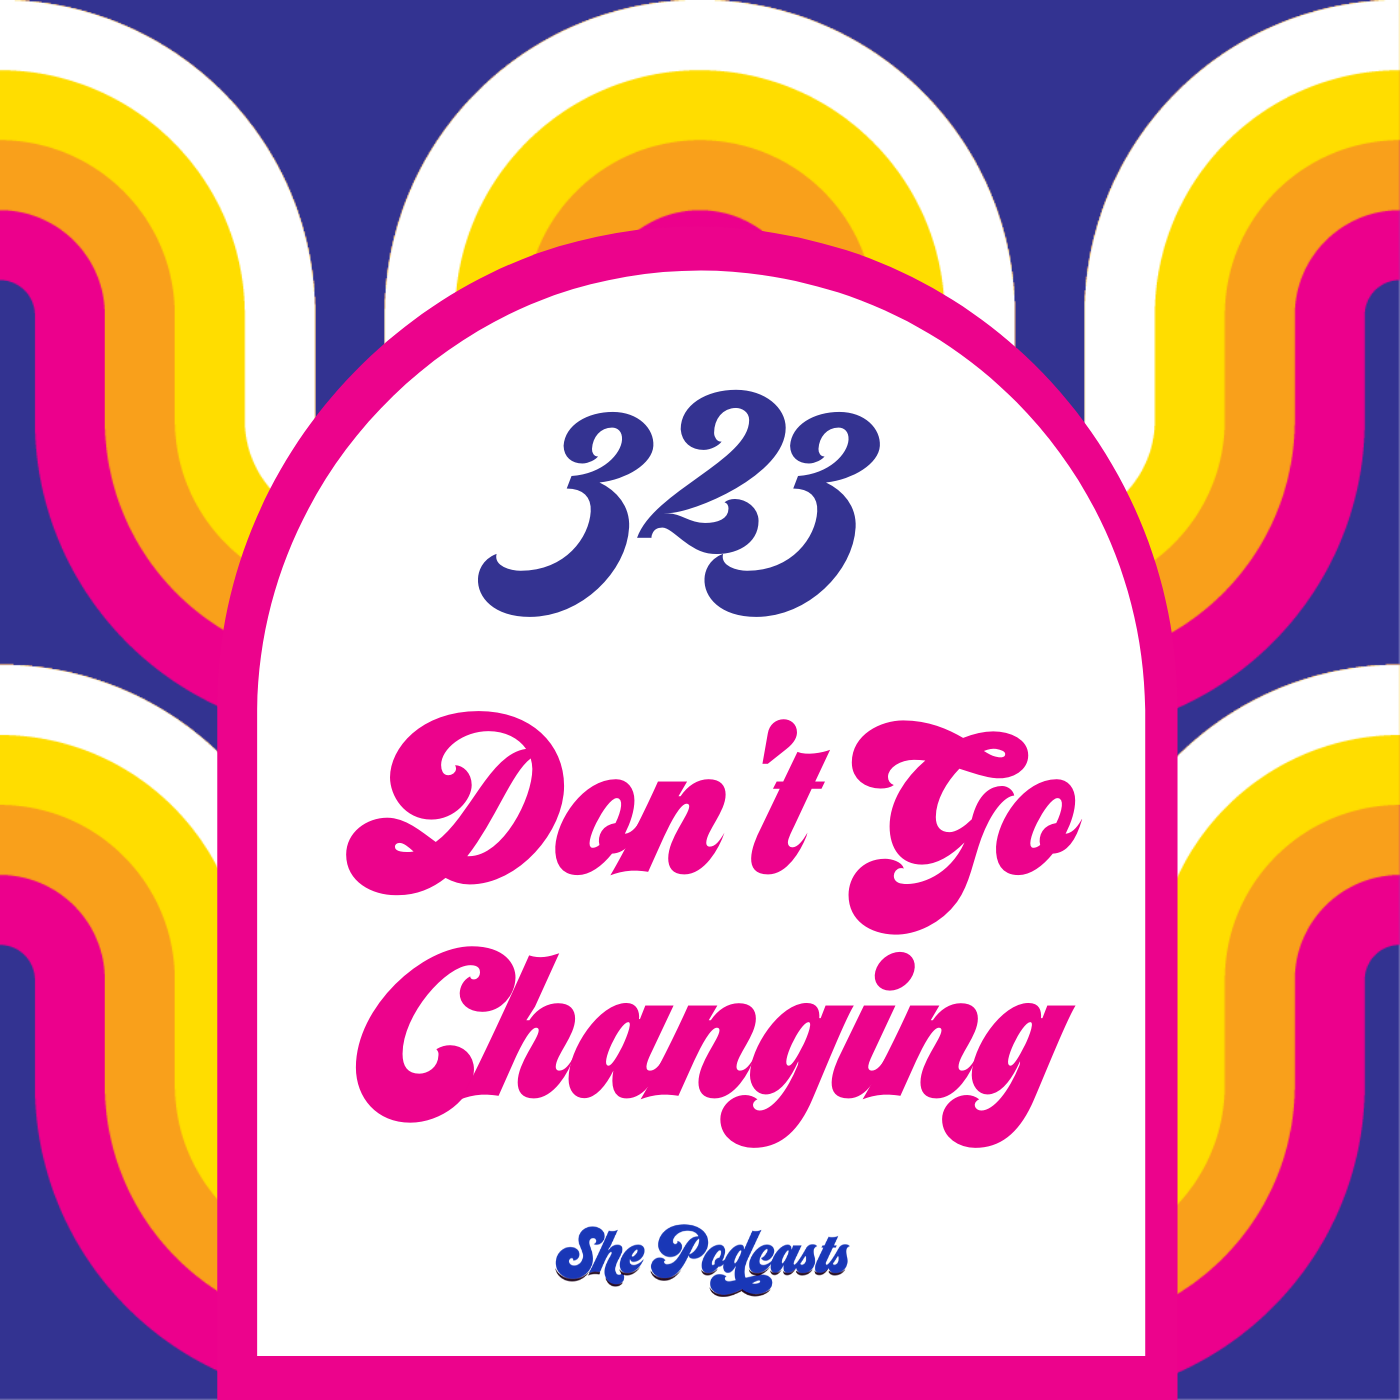 323 Dont Go Changing